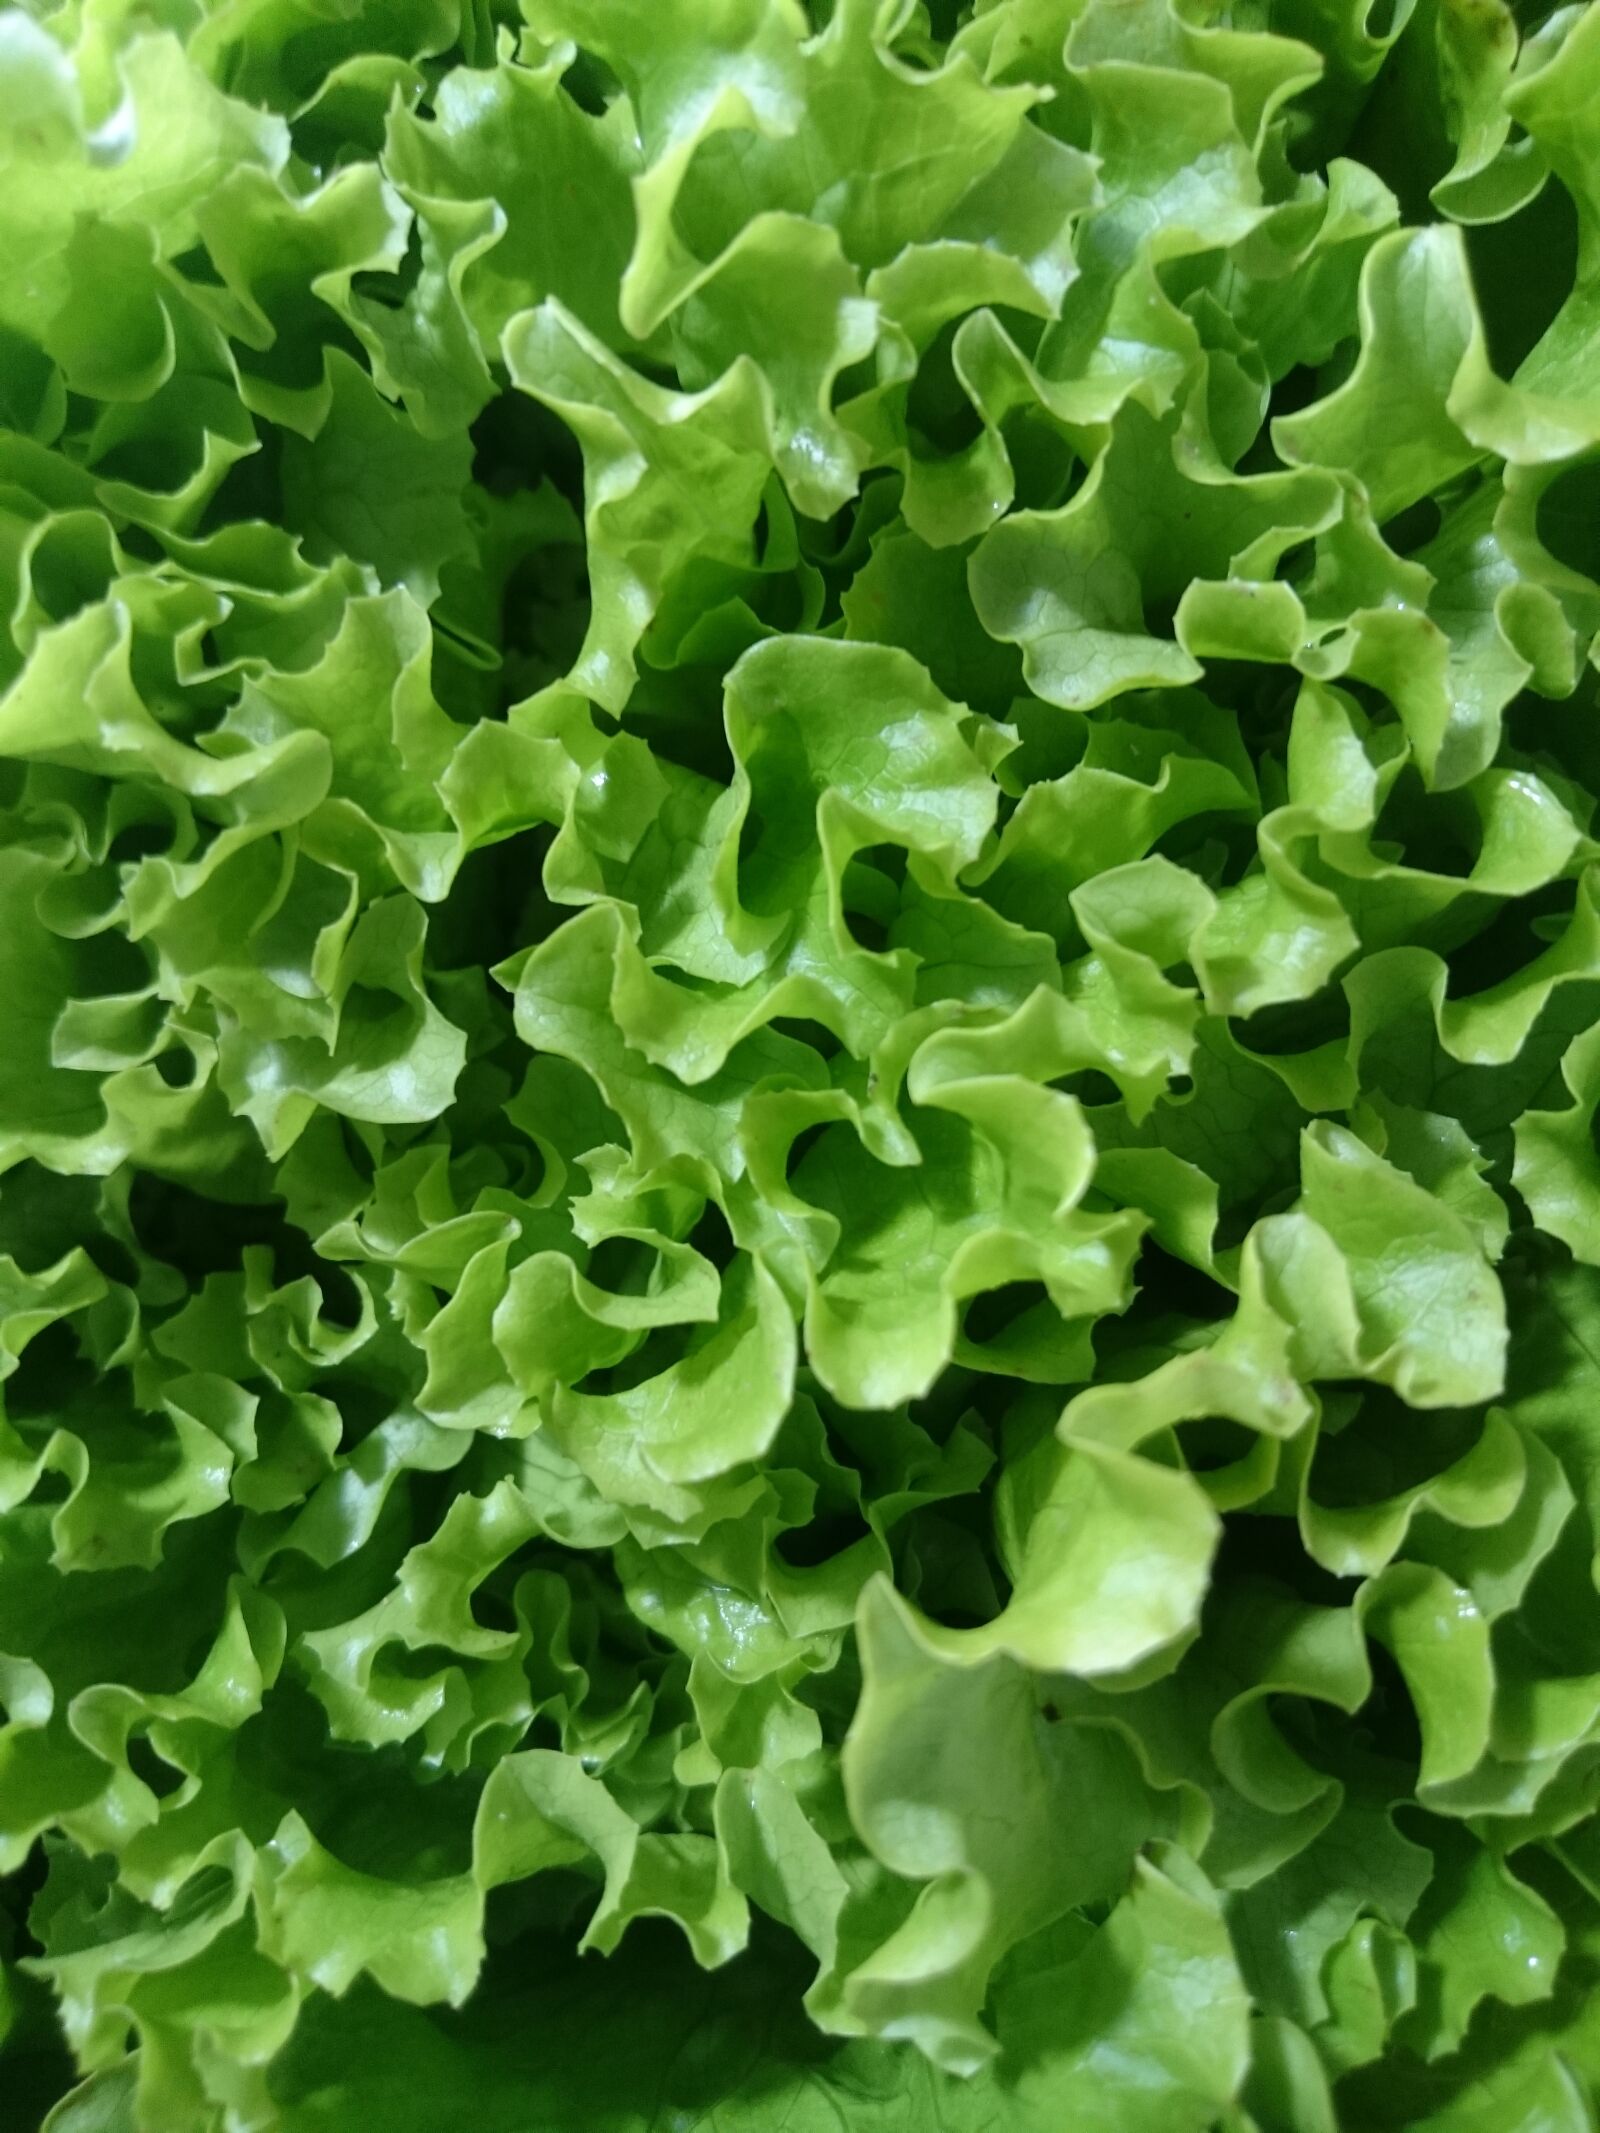 Sony Xperia Z3 Compact sample photo. Lettuce, green, diet photography